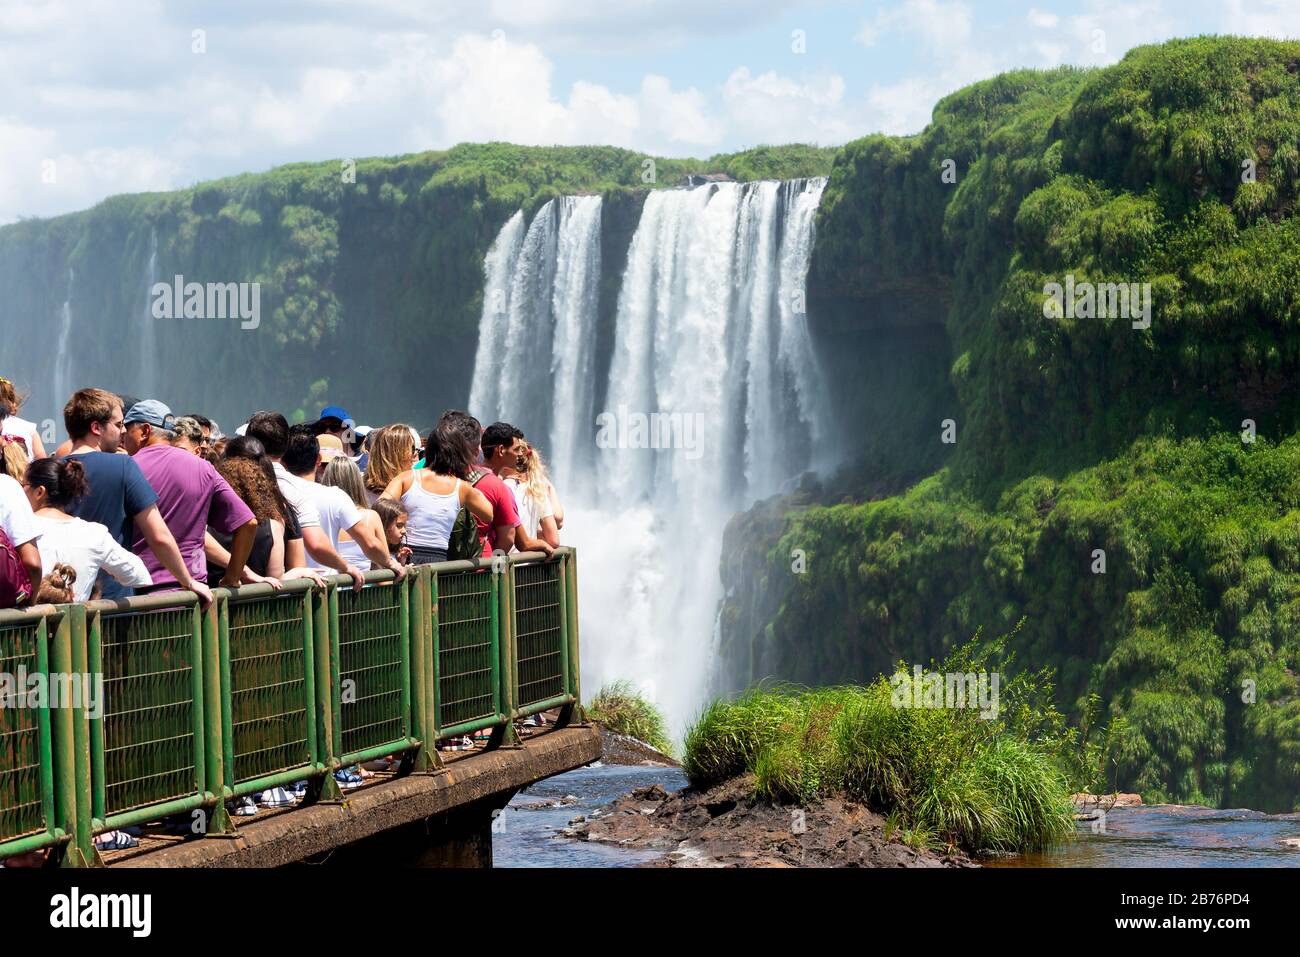 Crowd of tourists at Iguassu National Park (Cataratas do Iguaçu). Over tourism during holidays and vacations. Waterfalls out of focus as background. Stock Photo